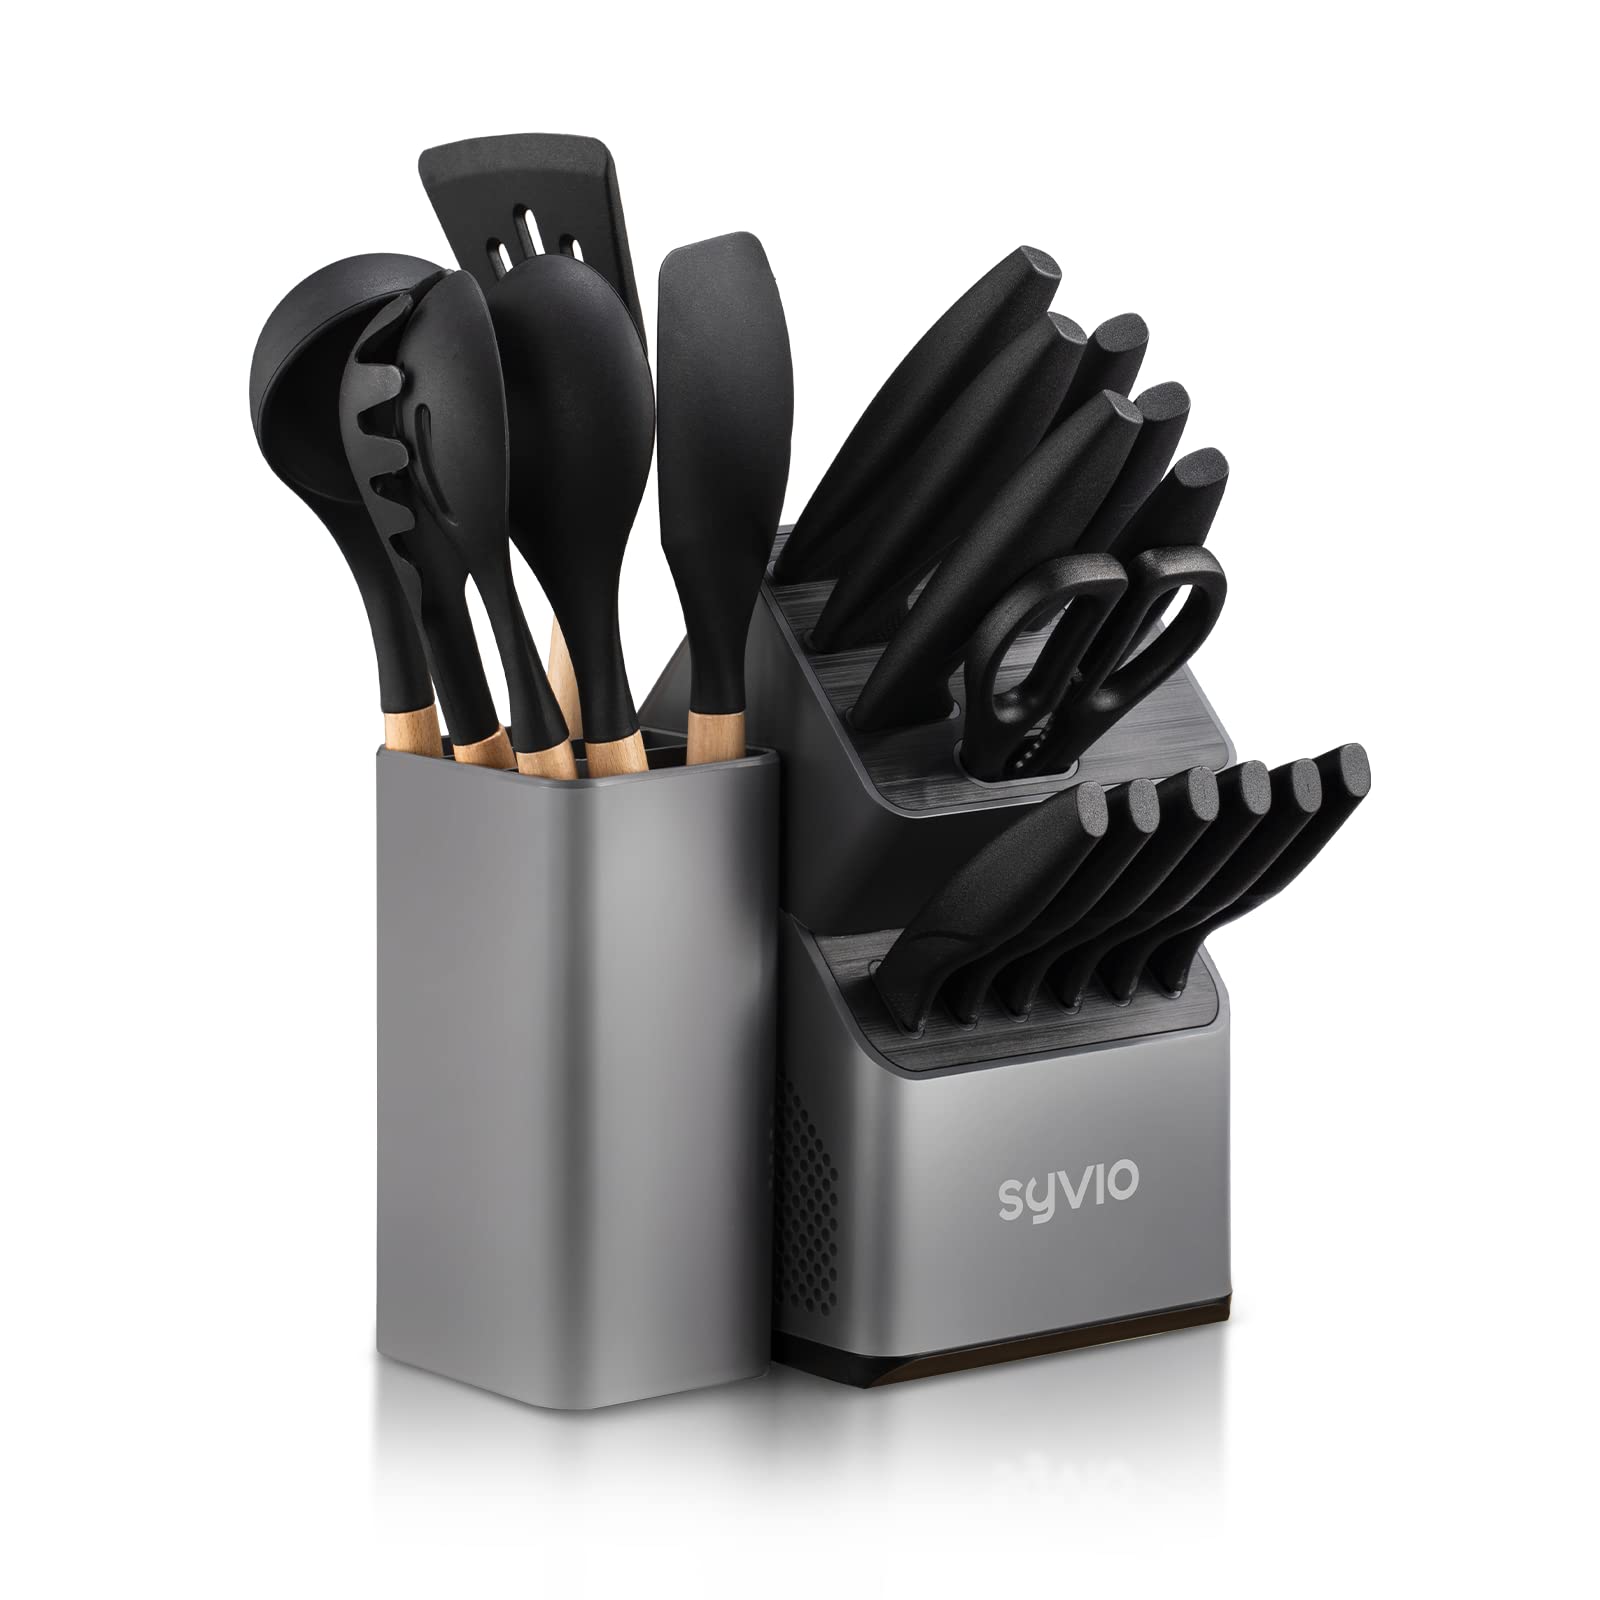 syvio Knife Sets for Kitchen with Block and 6 PCS Kitchen Utensils Set, 15 Pieces with Built-in Sharpener, 21-in-1 Kitchen Set $39.99